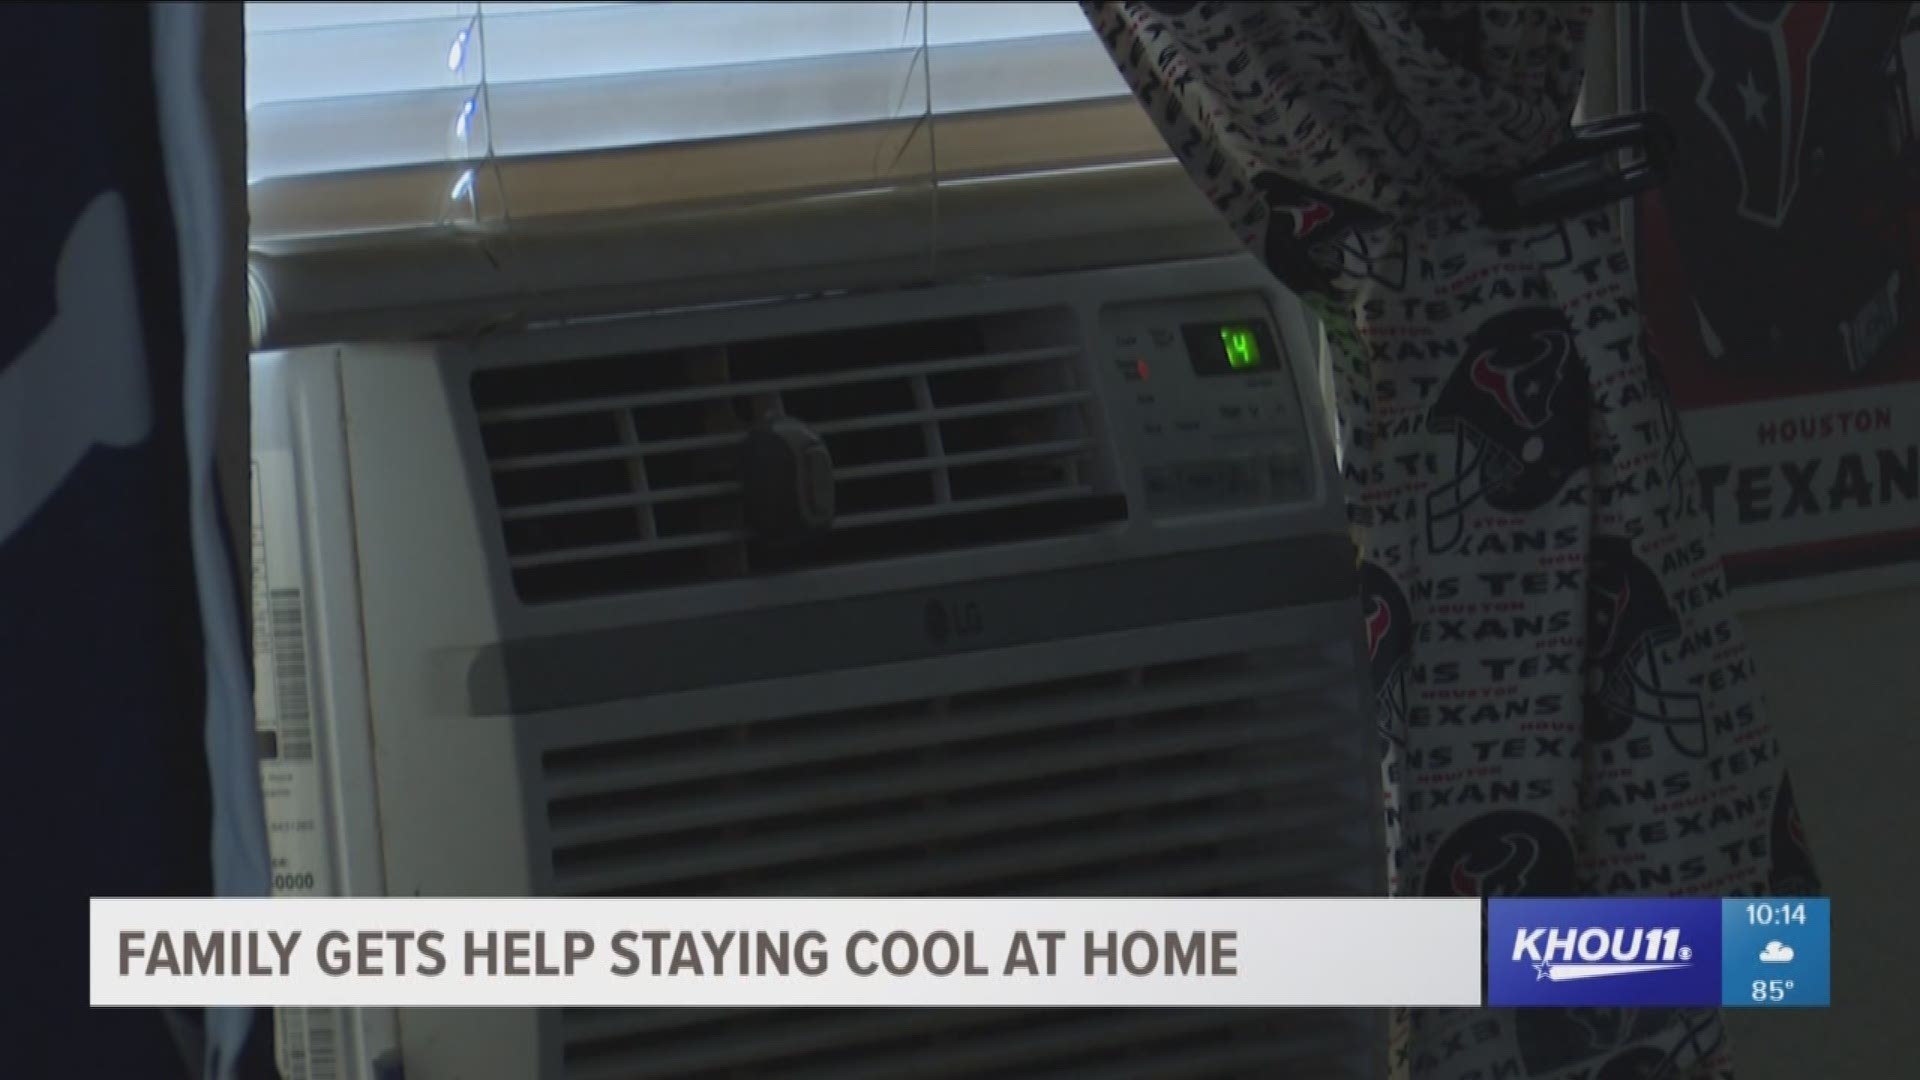 In all this heat, it's a breath of fresh air for one east Houston family sleeping in air conditioning for the first time in nearly two years.